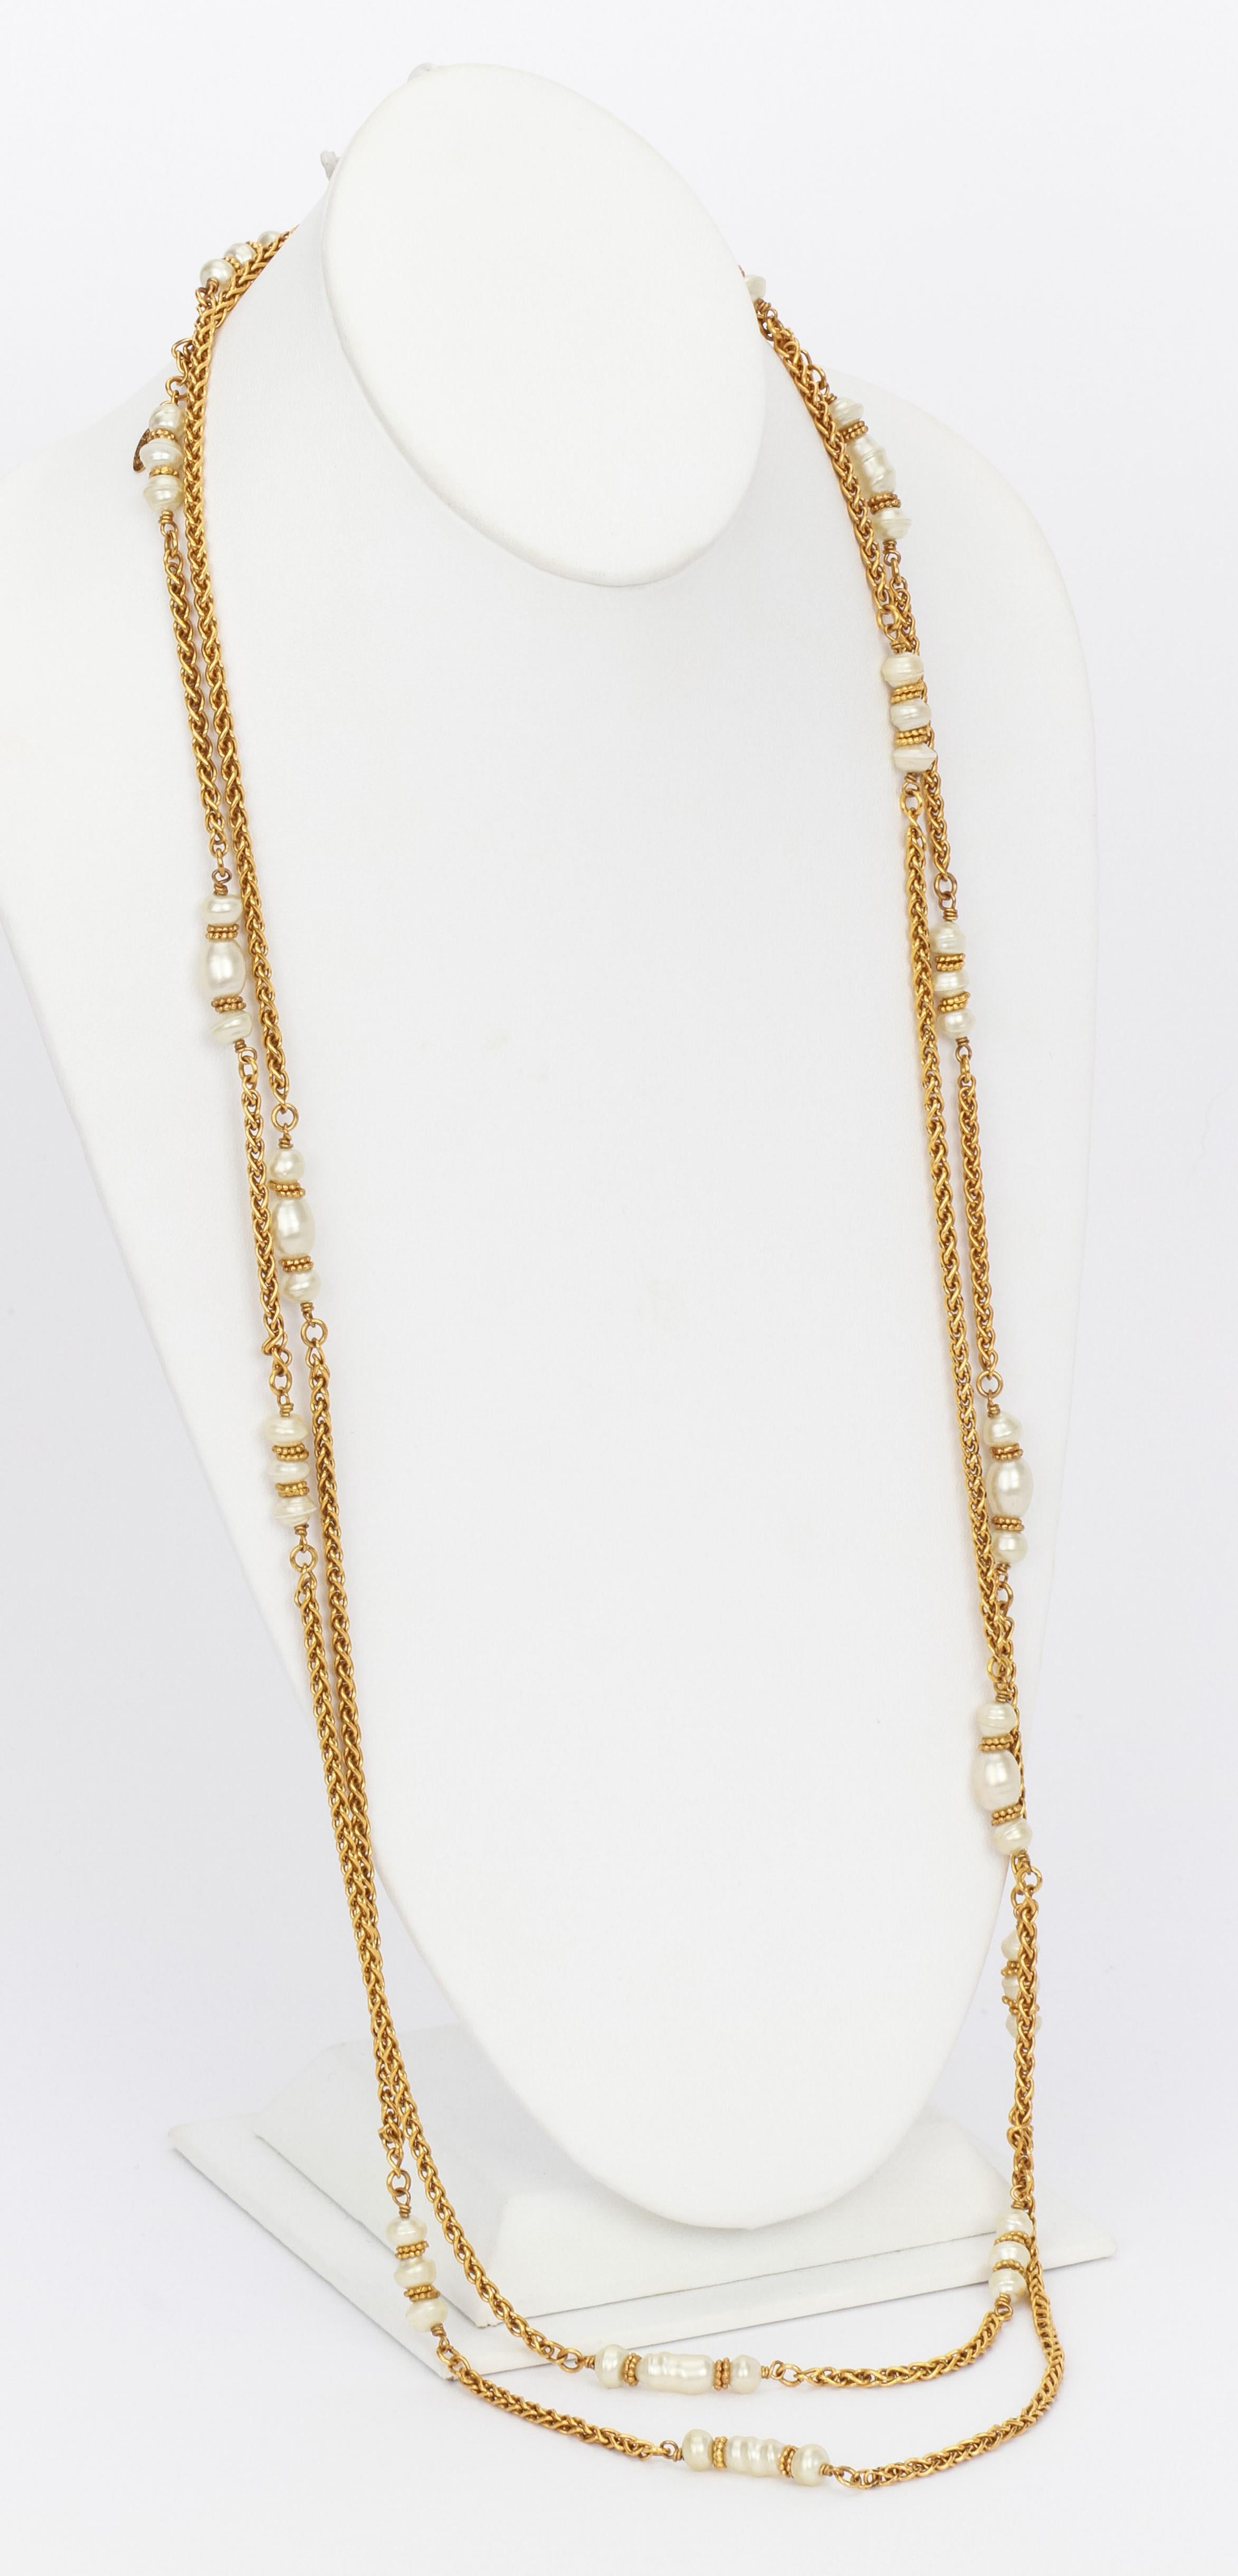 Chanel long sautoir necklace with gold chain and pearls. Spring 1997 collection. Wear in many different ways playing with its length. Comes with original pouch.